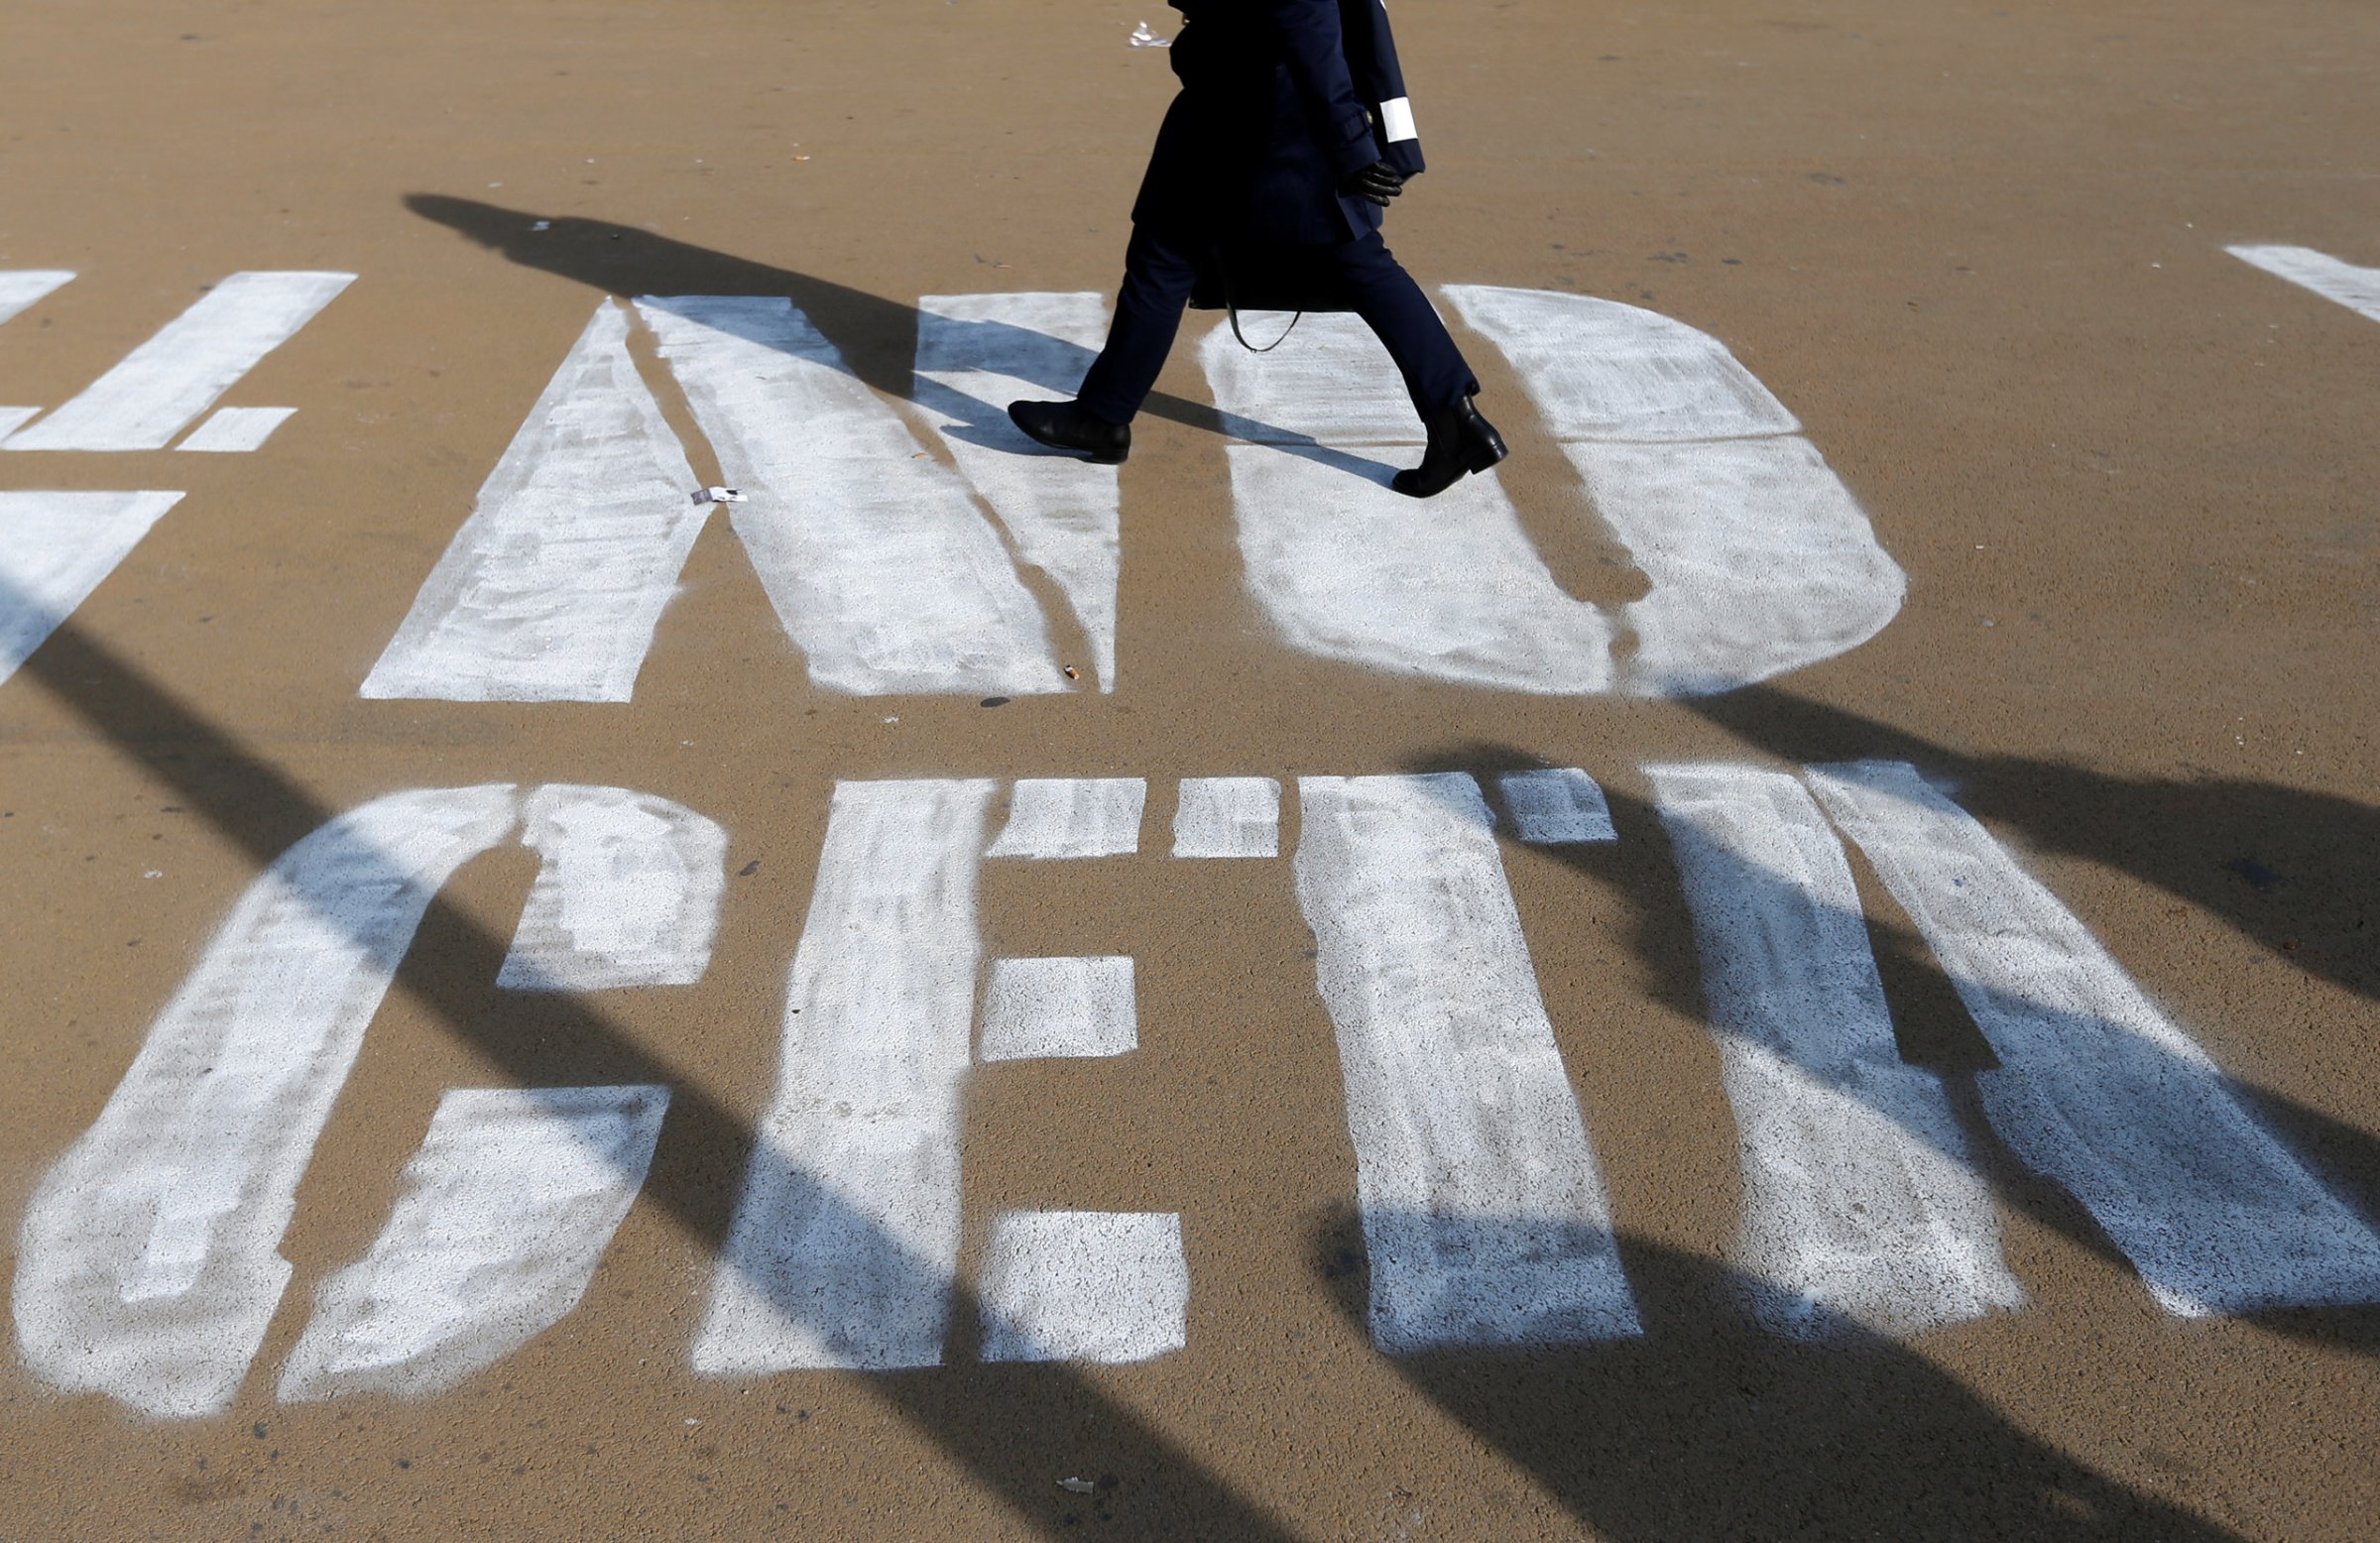 A woman walks on a graffiti reading "NO CETA", referring to the Comprehensive Economic and Trade Agreement, in Brussels, Belgium, October 13, 2016. REUTERS/Francois Lenoir - RTSS28H